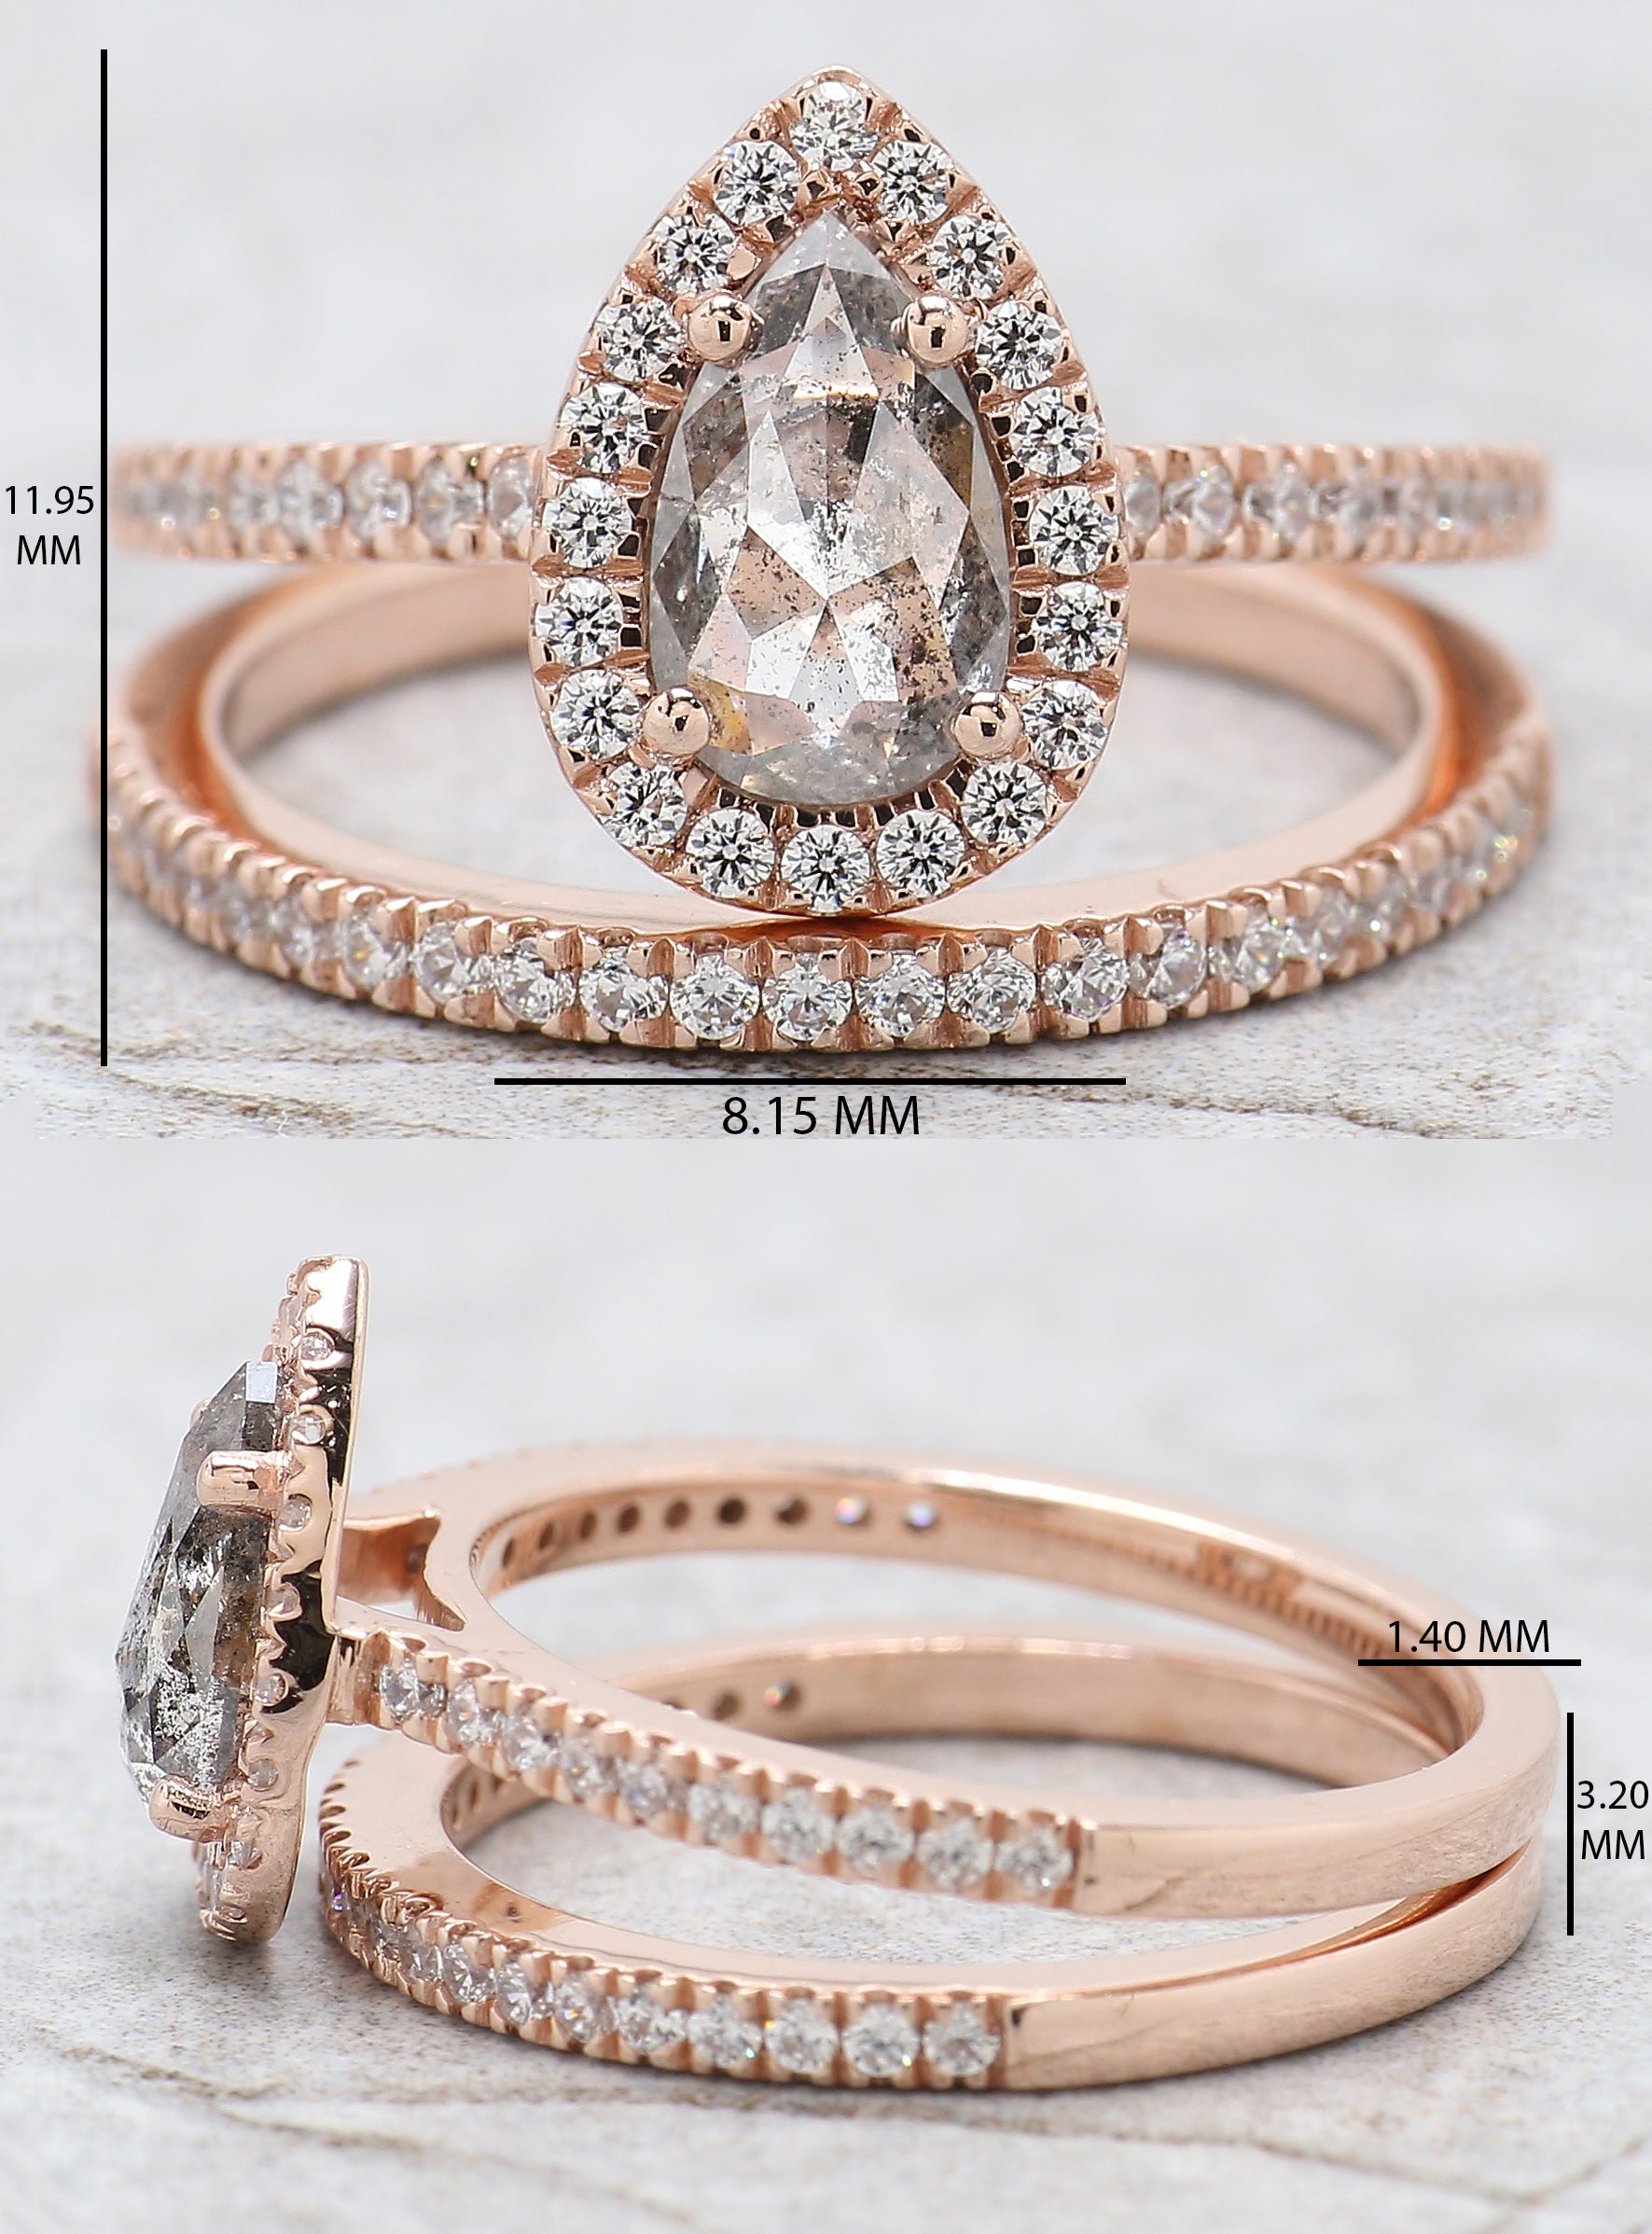 Pear Cut Salt And Pepper Diamond Ring 0.79 Ct 8.05 MM Pear Diamond Ring 14K Solid Rose Gold Silver Pear Engagement Ring Gift For Her QL9511